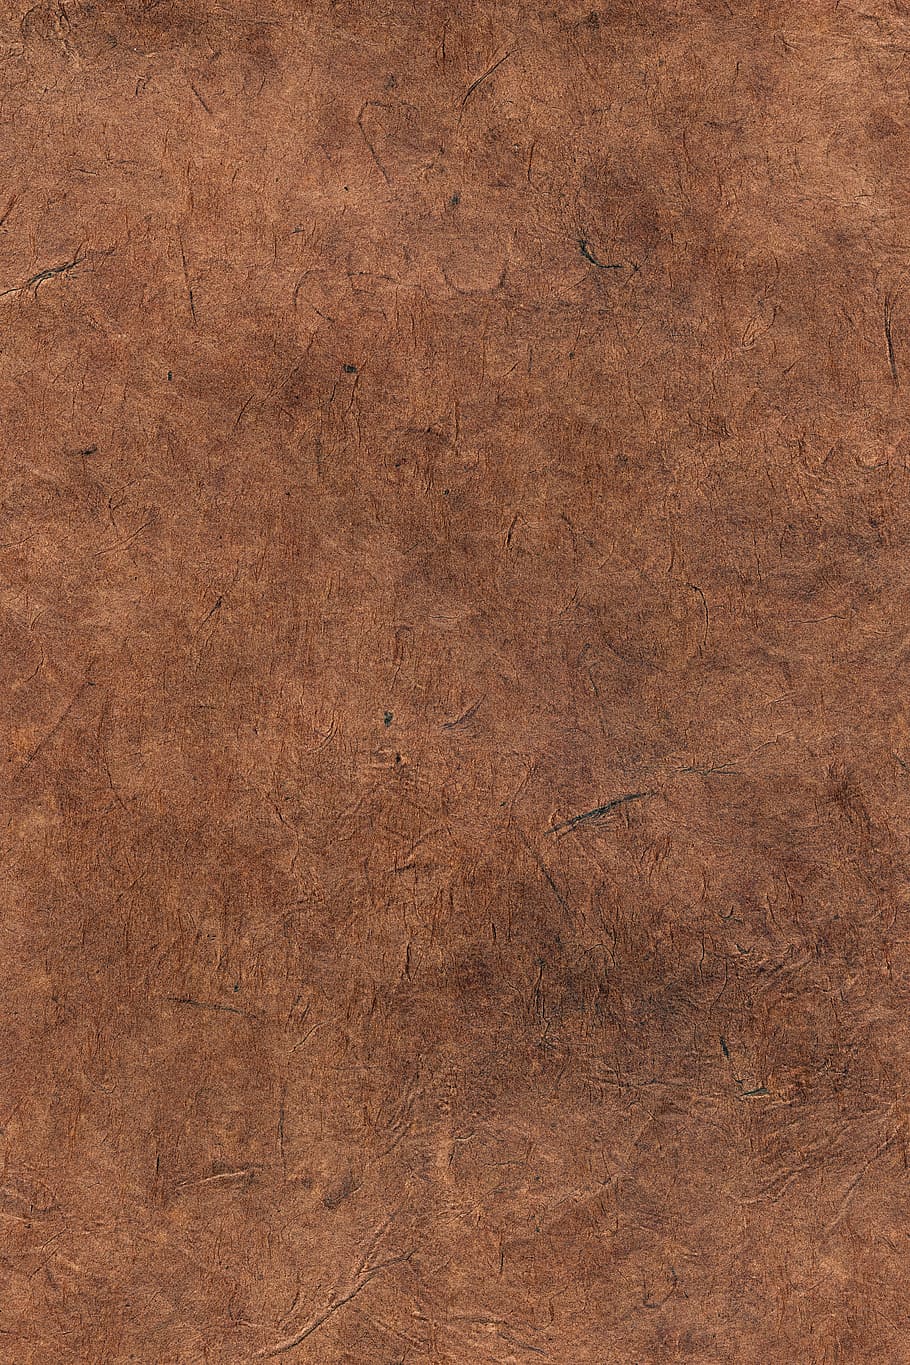 untitled, paper, brown, handmade, handmade paper, texture, papyrus